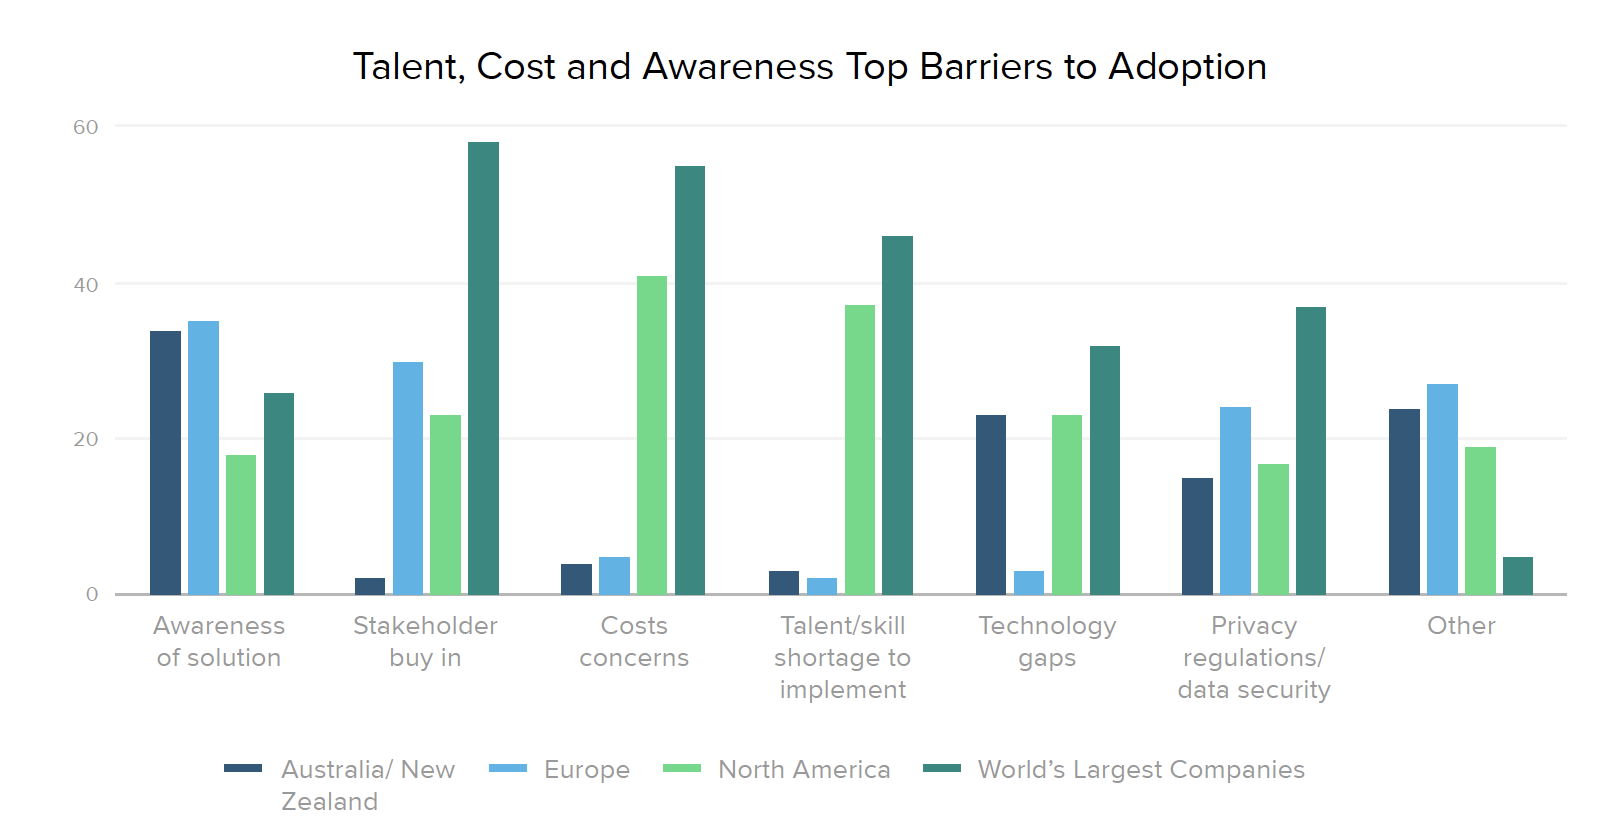 Talent, Cost and Awareness Top Barriers to Adoption